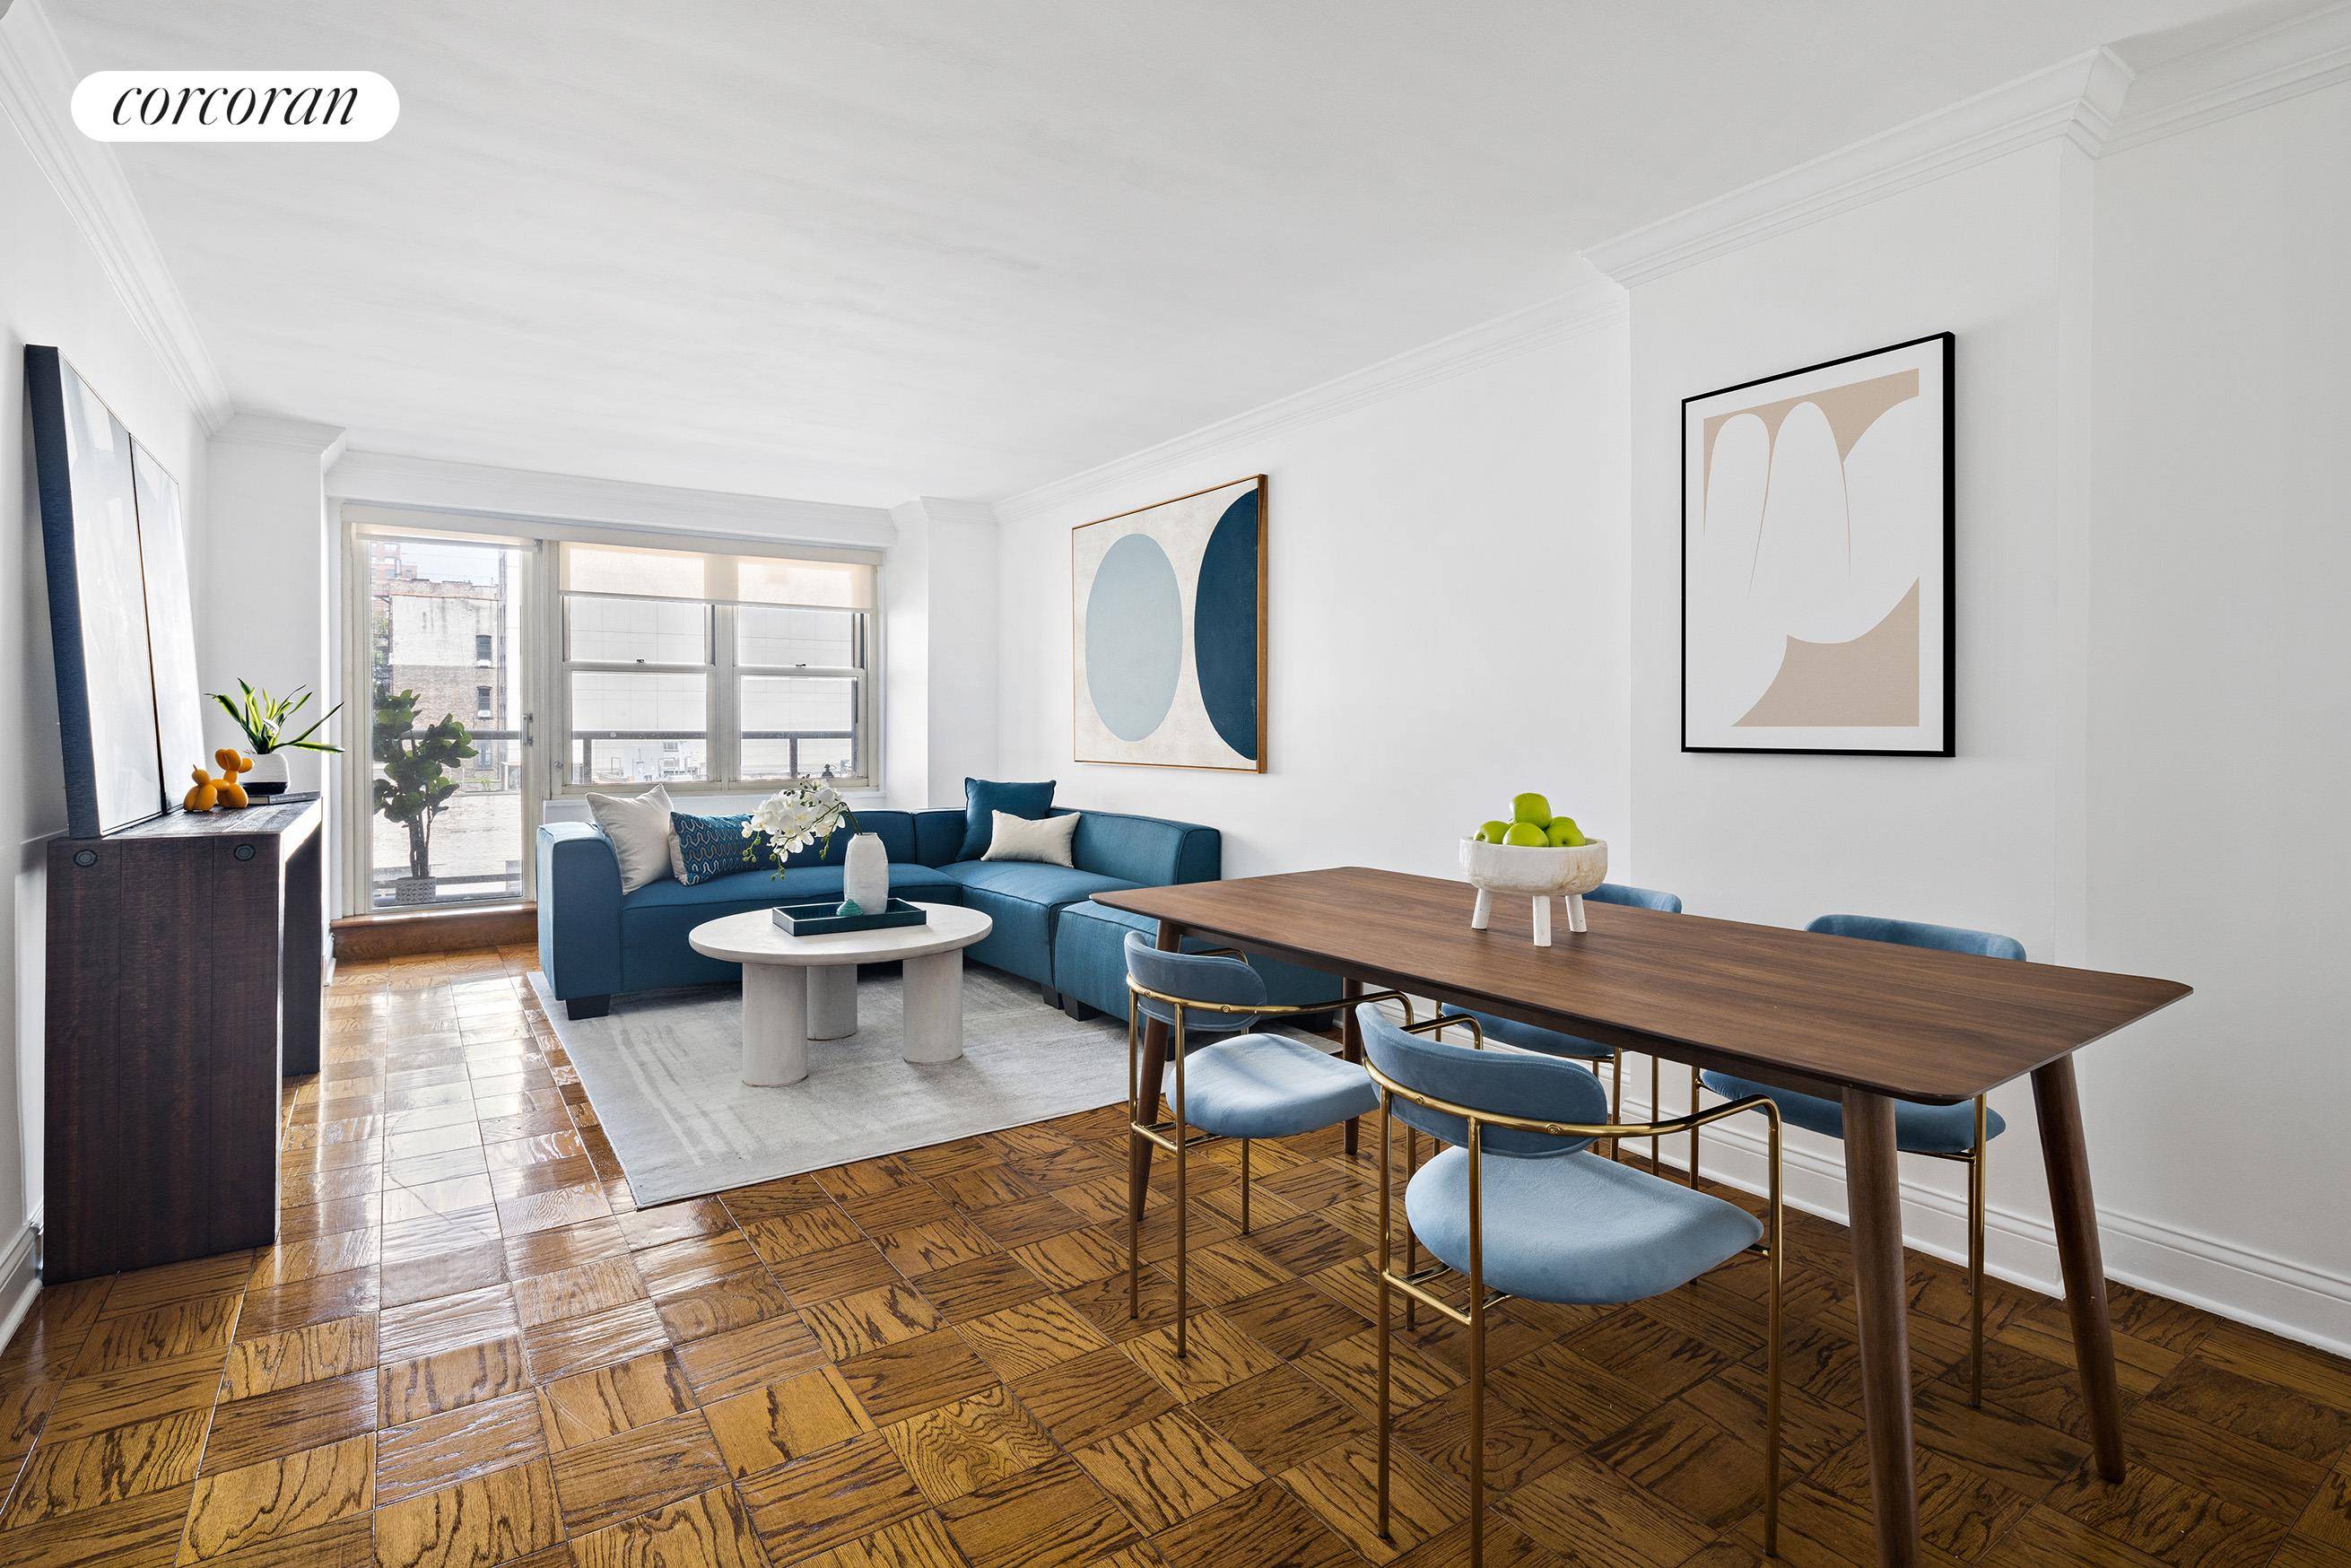 New to market at the highly sought after New York Towers and conveniently located at the crossroads of Kips Bay and Gramercy Park is this newly renovated and oversized 1 ...